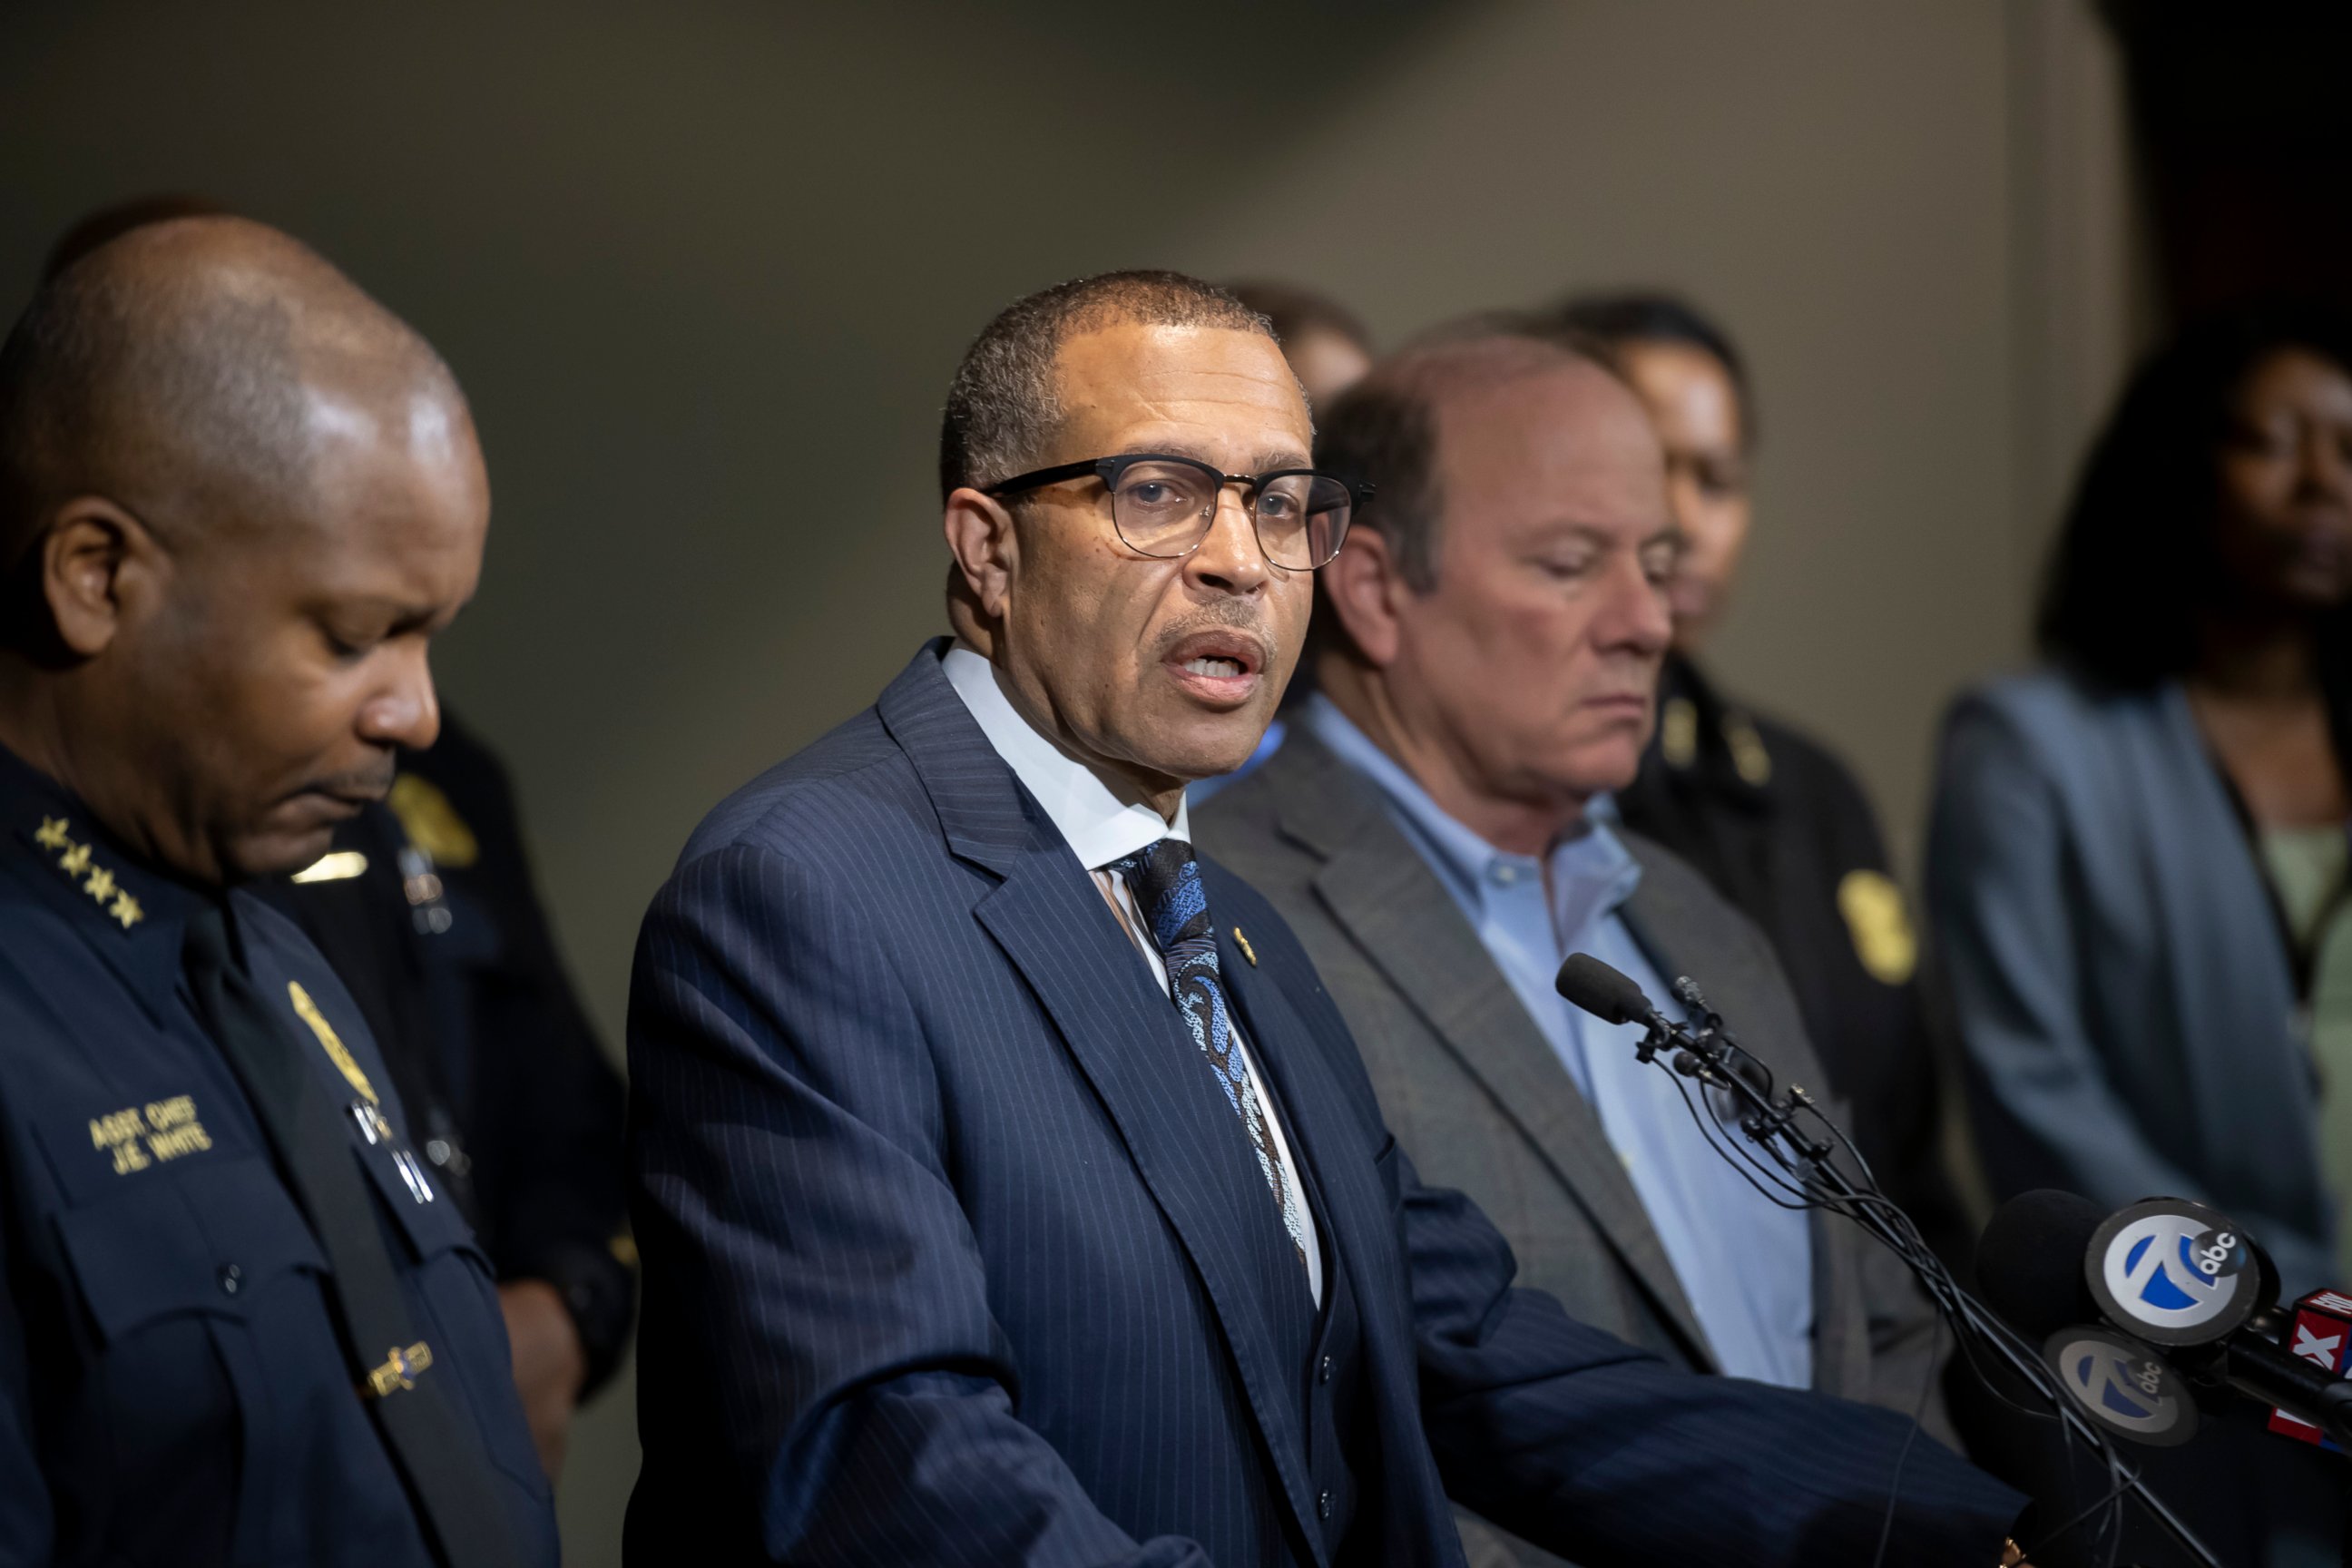 PHOTO: In this Nov. 21, 2019, file photo, Detroit Police Chief James Craig, second left, speaks to the media at Detroit Public Safety Headquarters in Detroit.